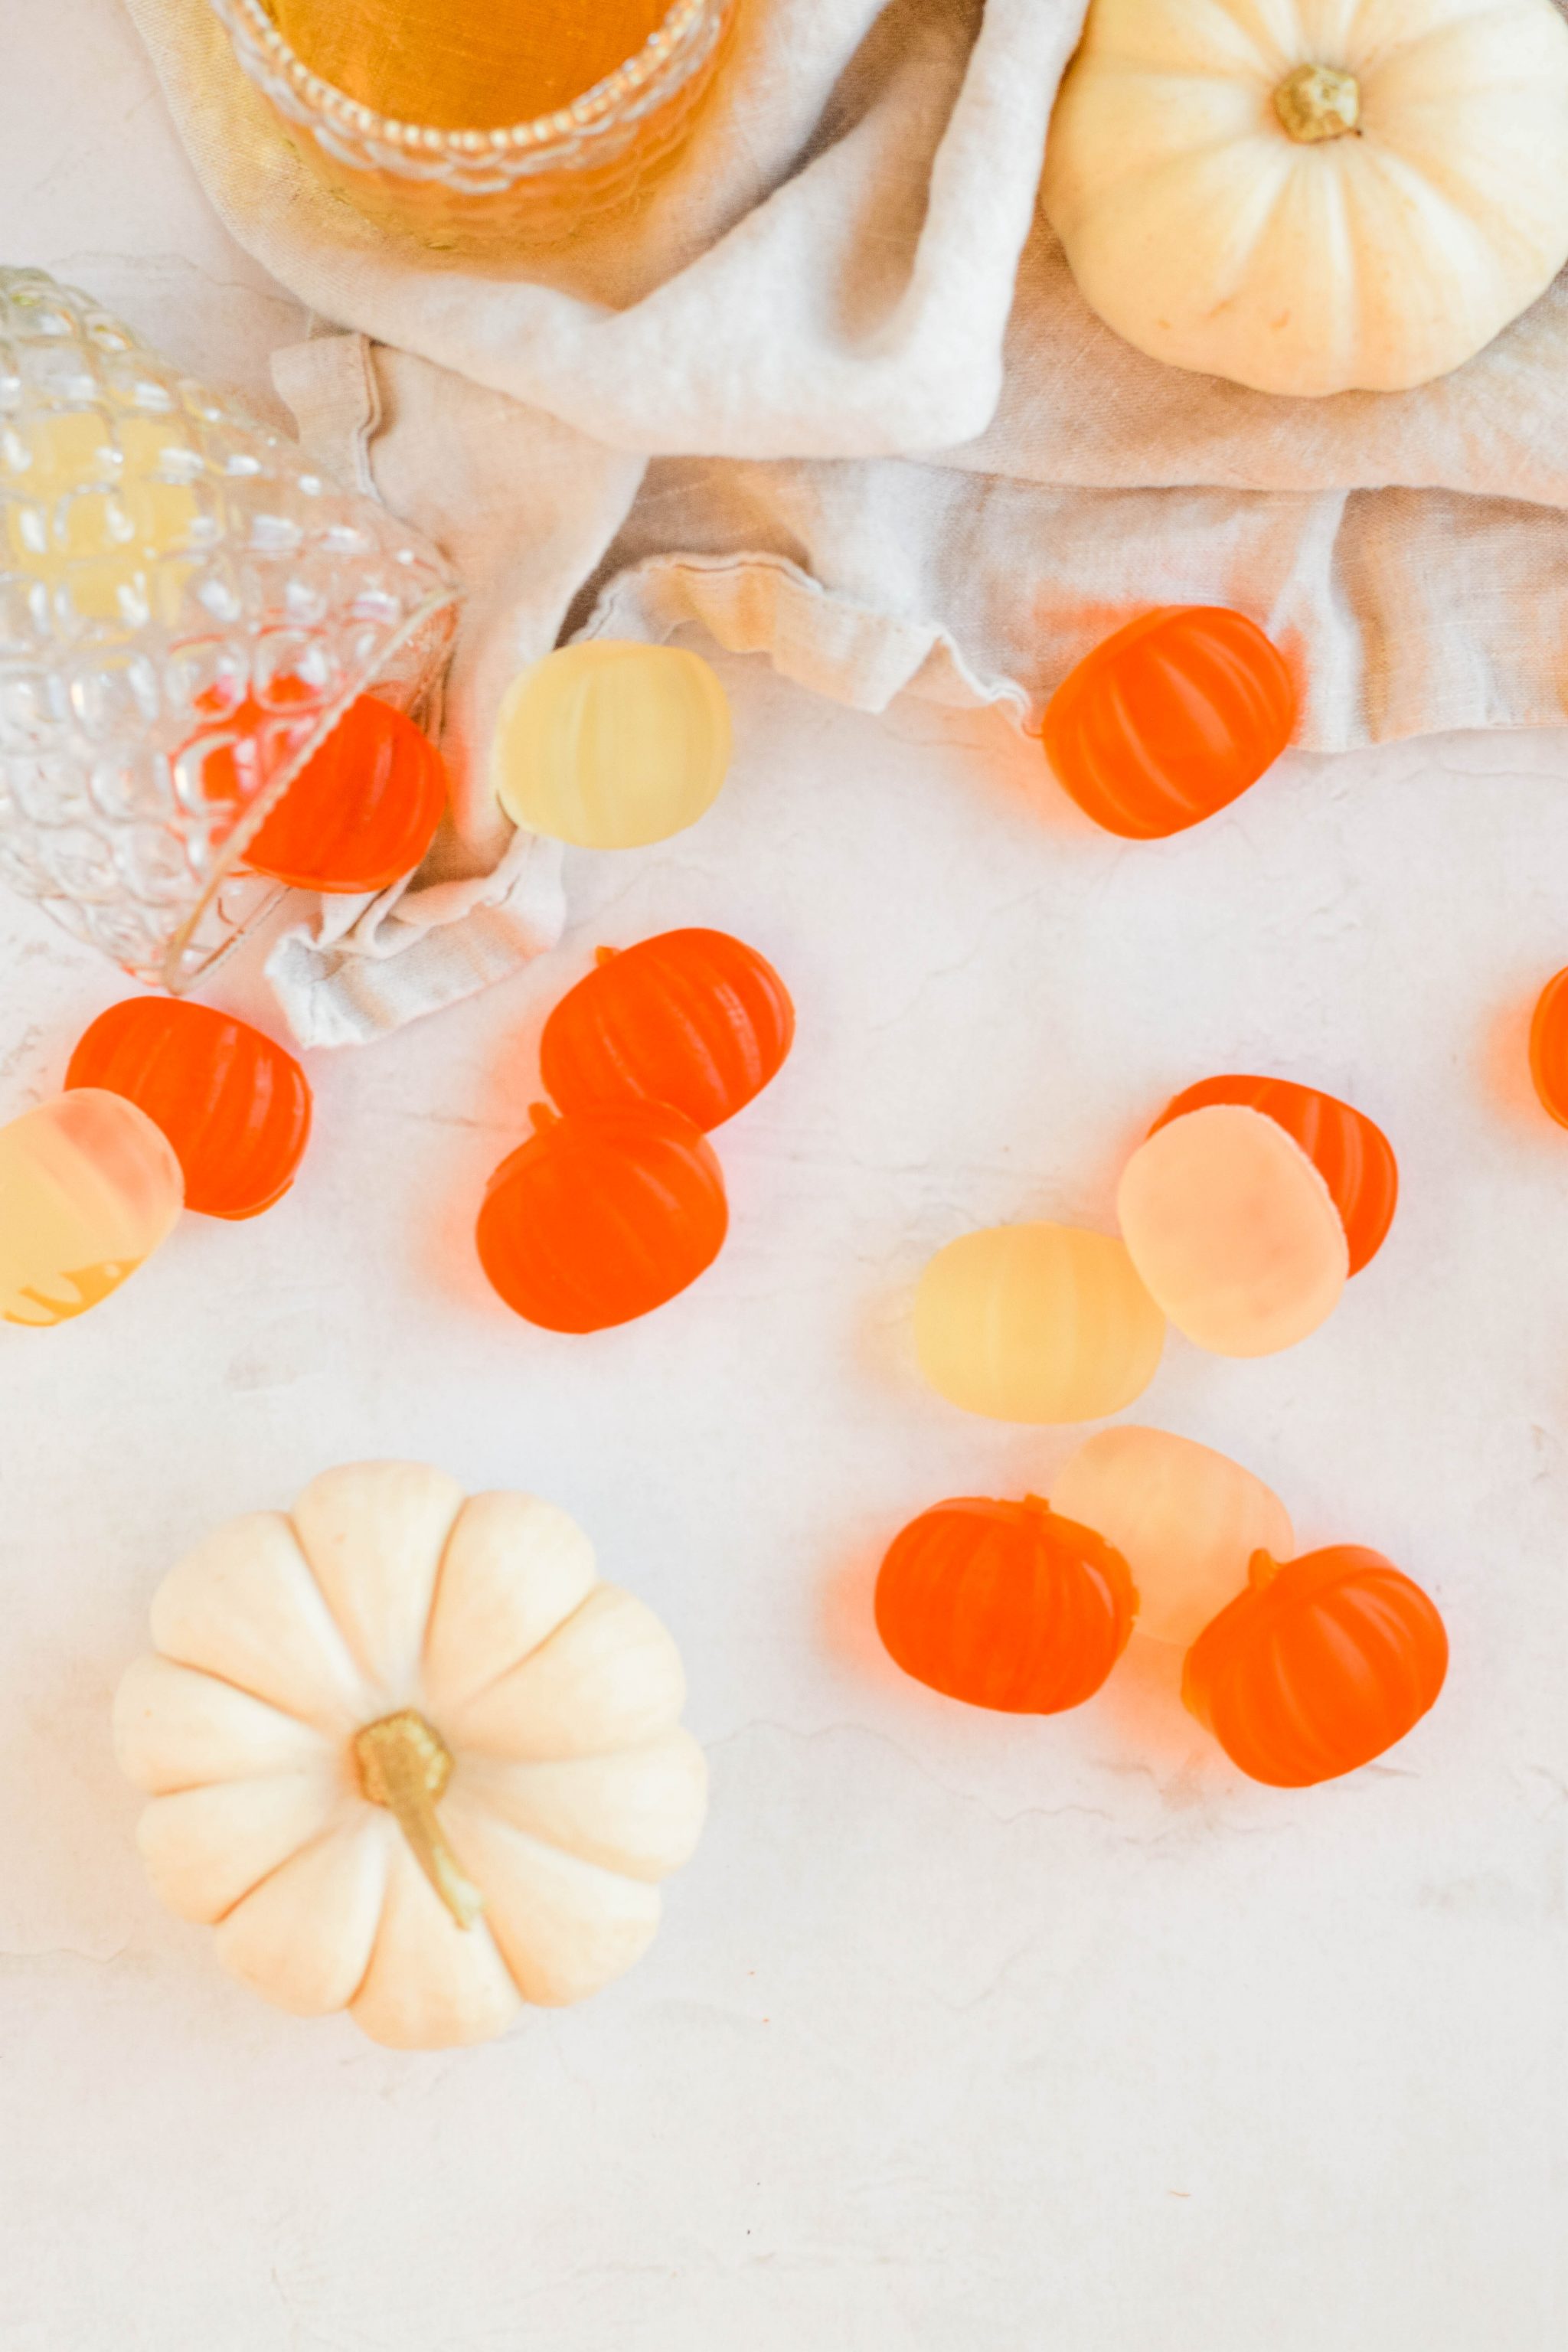 pumpkin shaped halloween jello shots spread out on white background with linen and glass in background.